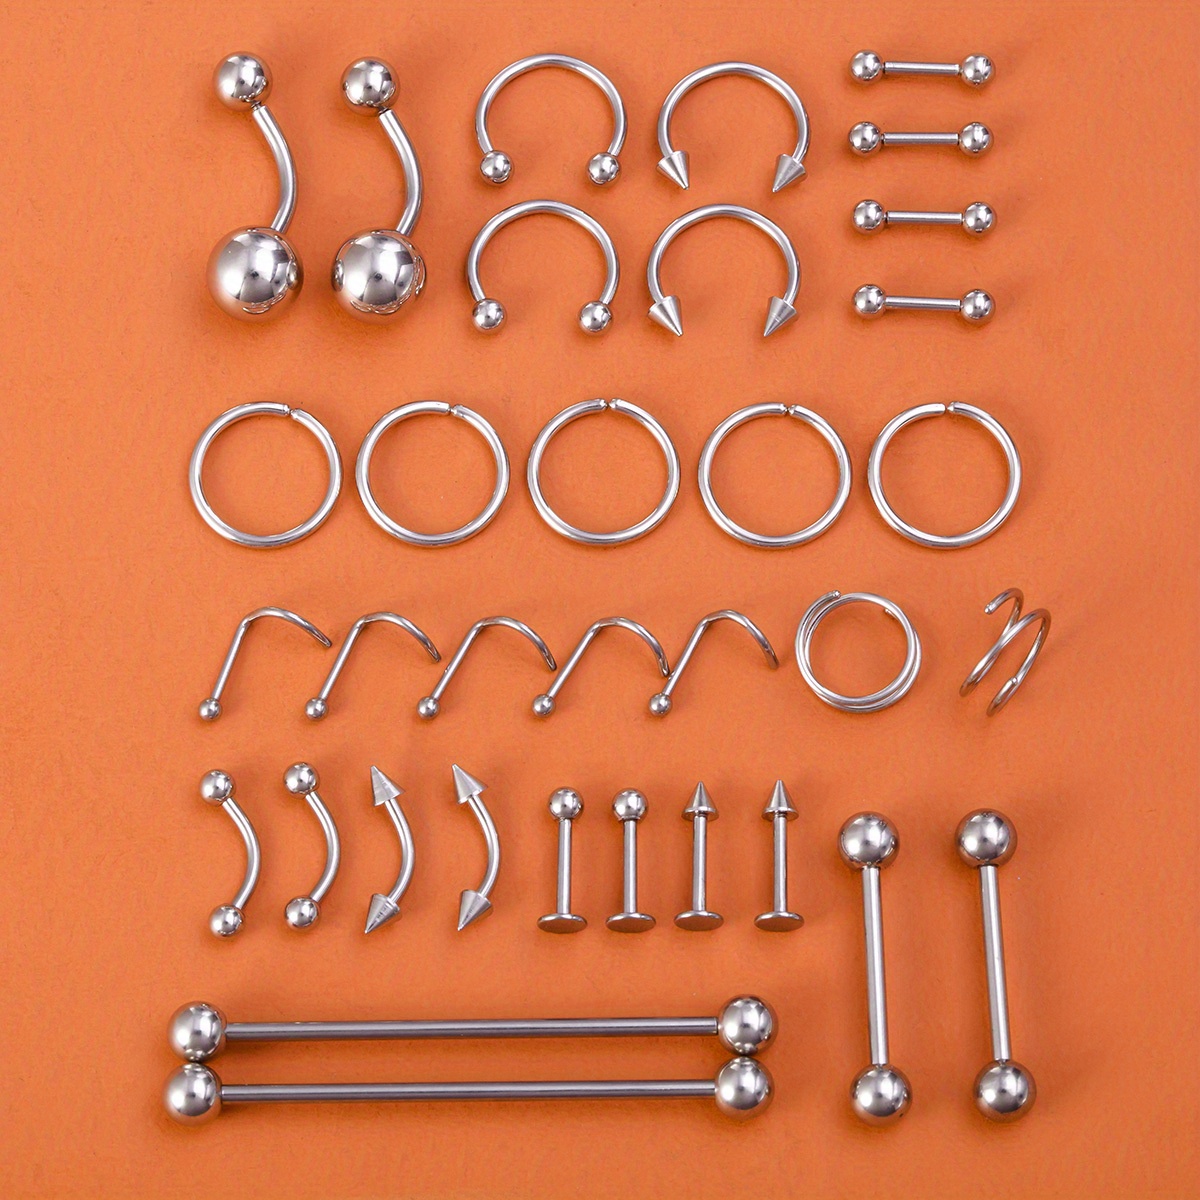 18-46pcs Stainless Steel BCR CBR Lip Nose Eyebrow Body Piercing Kit Tragus Cartilage Helix Daith Rook Earring Piercing Jewelry, Jewels for Men,Temu